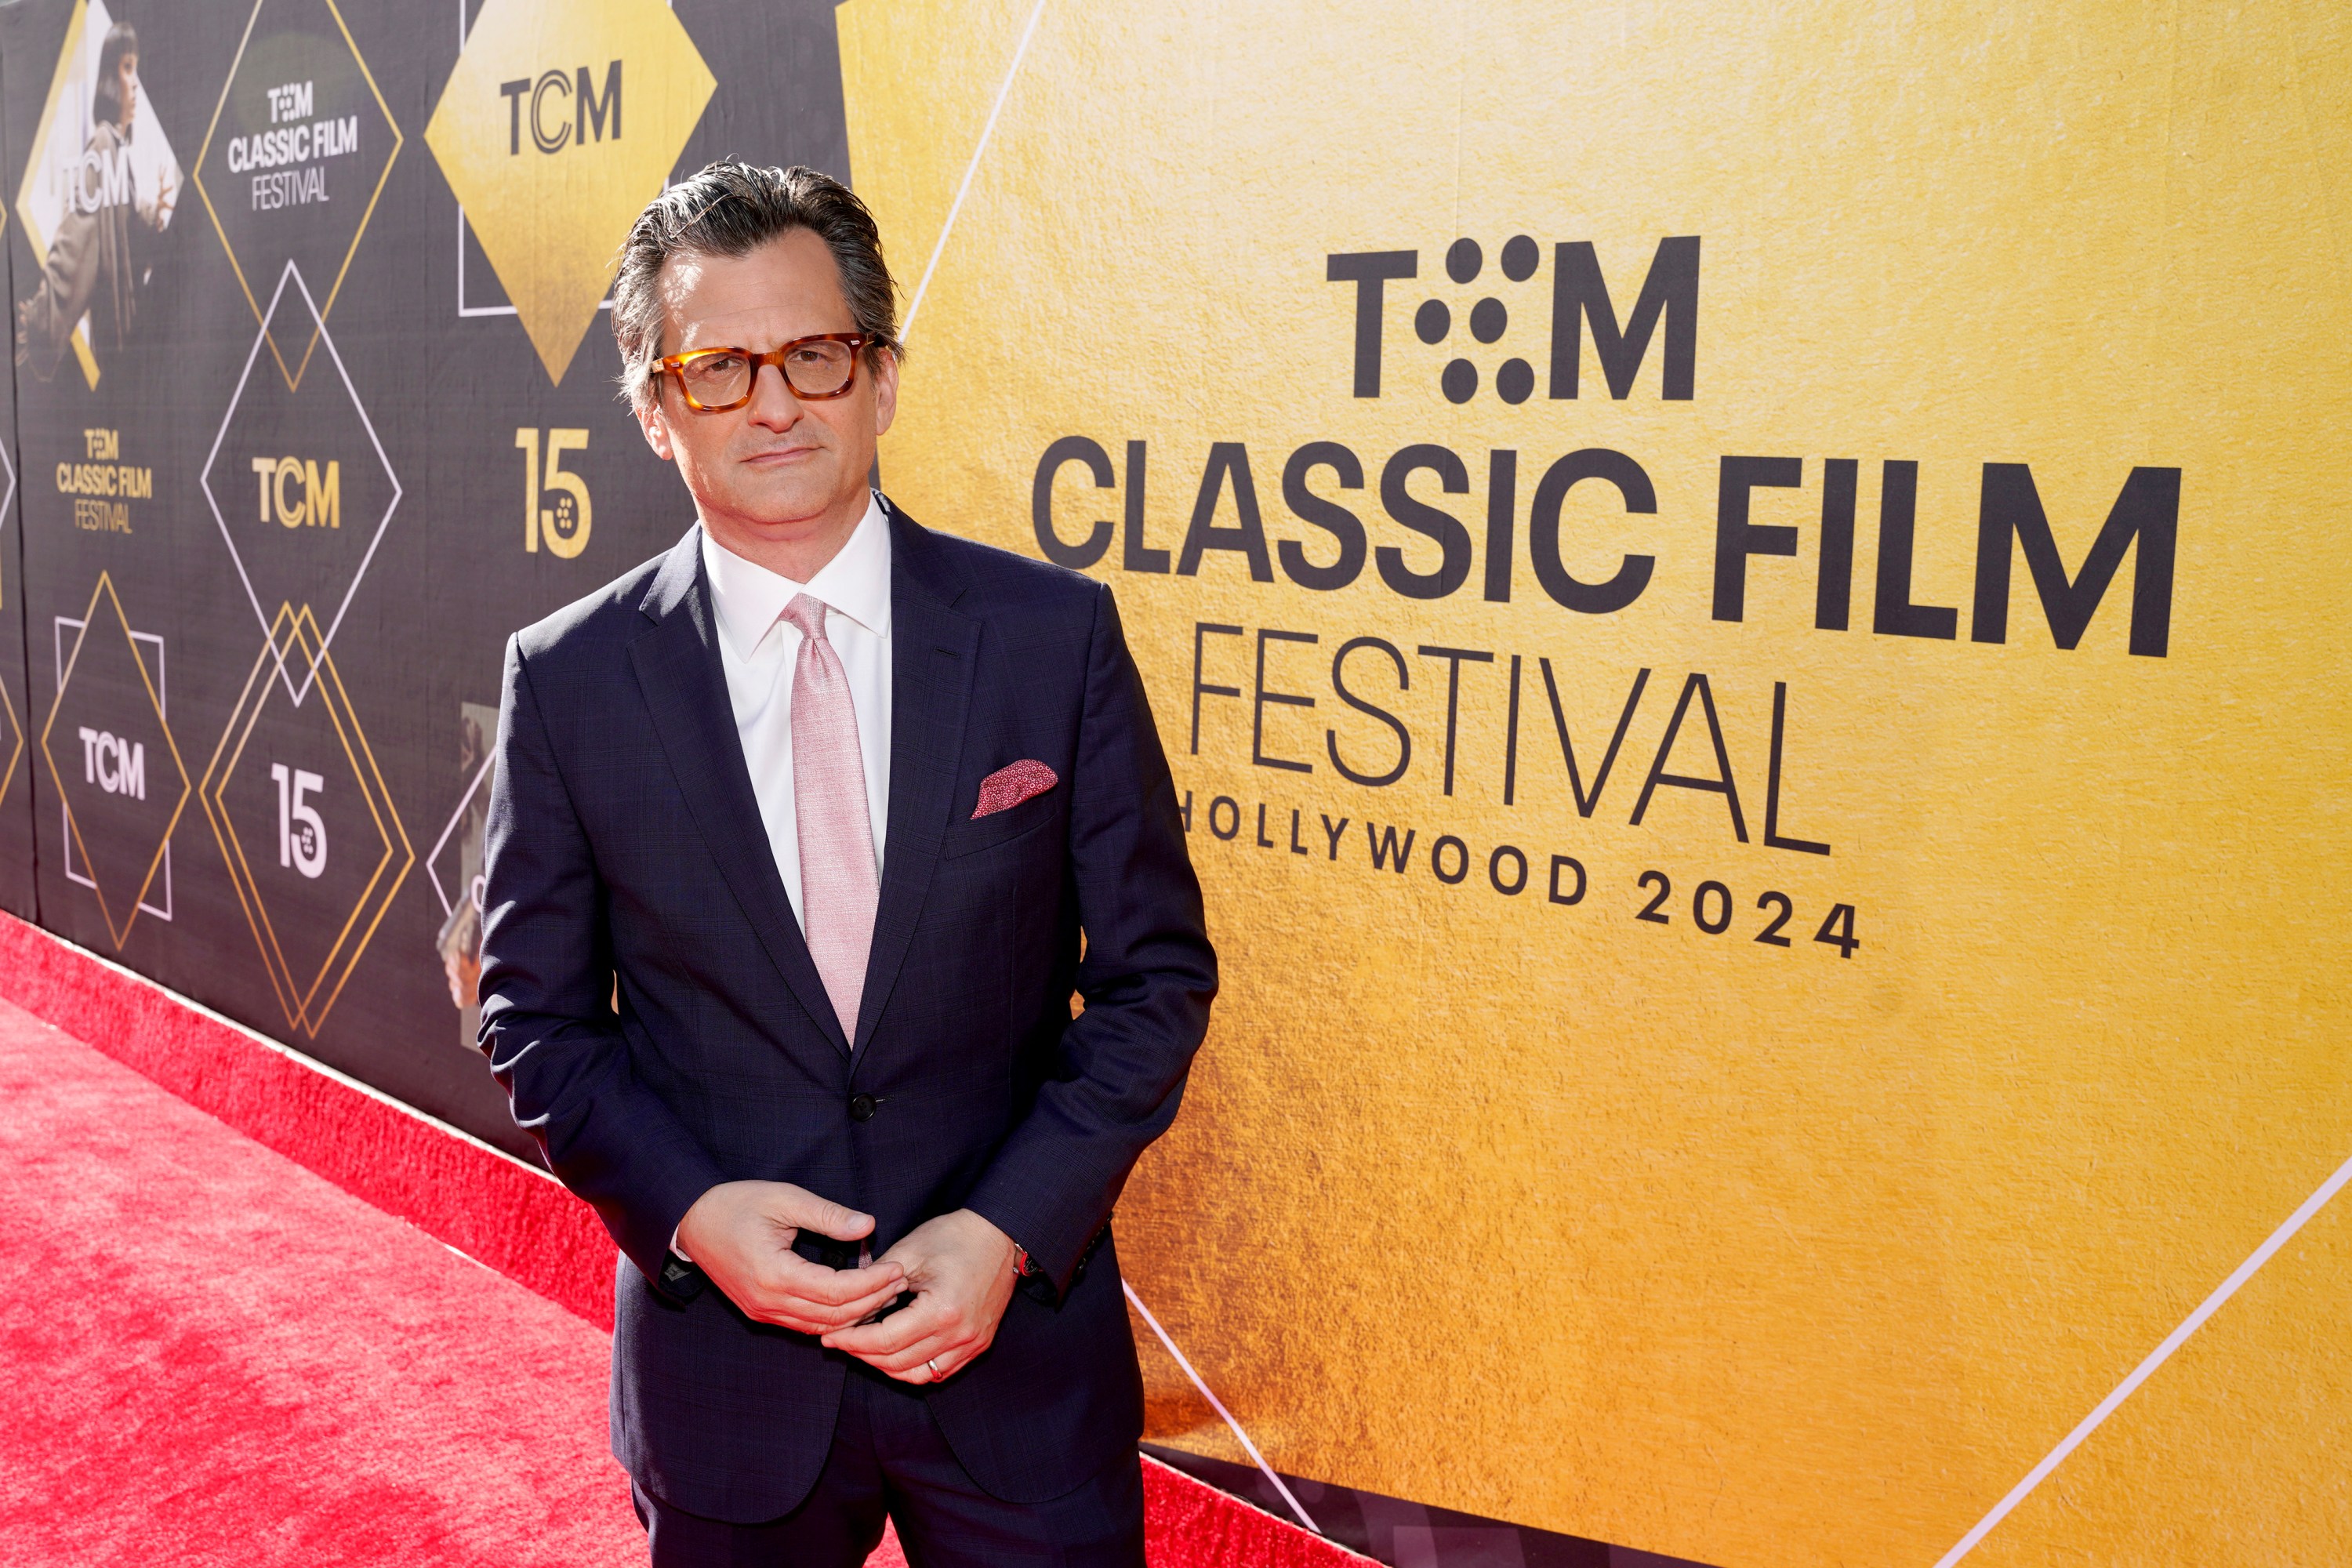 HOLLYWOOD, CALIFORNIA - APRIL 18: TCM Host Ben Mankiewicz attends the Opening Night Gala and 30th Anniversary Screening of 'Pulp Fiction' during the 2024 TCM Classic Film Festival at TCL Chinese Theatre on April 18, 2024 in Hollywood, California. (Photo by Presley Ann/Getty Images for TCM)